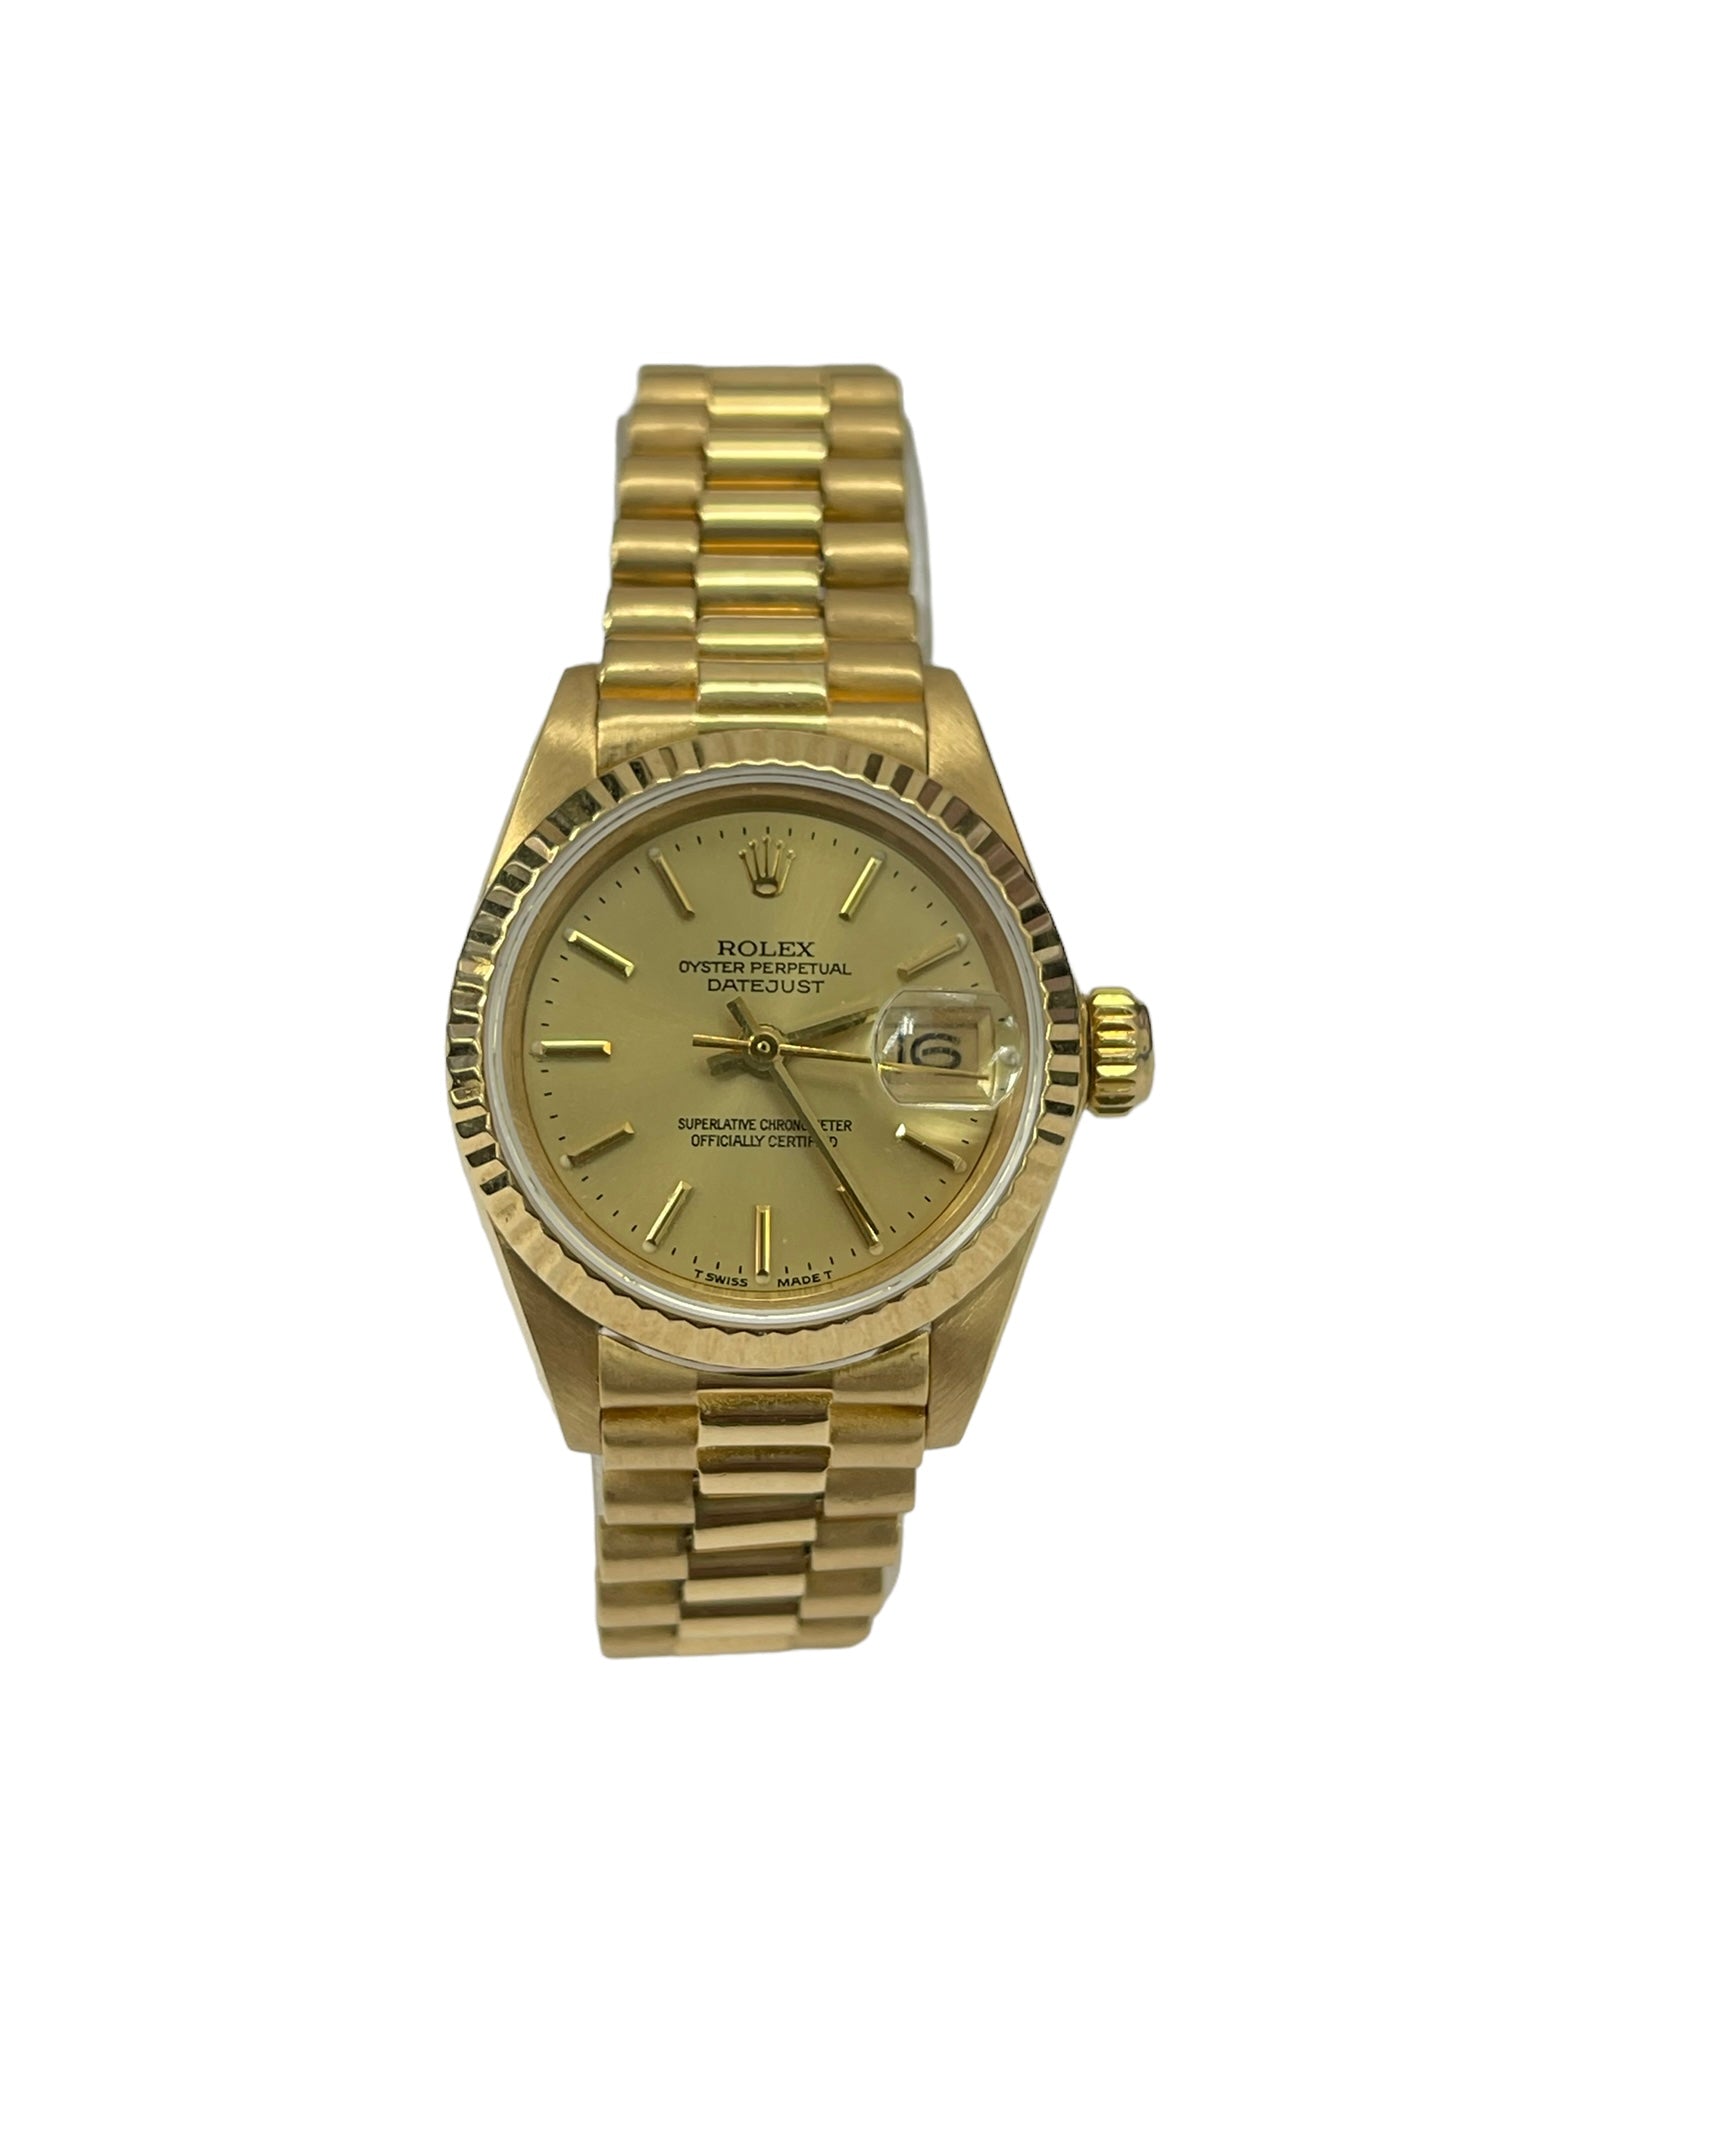 Rolex Lady's Datejust President Watch Champagne Stick Dial Ref 6917